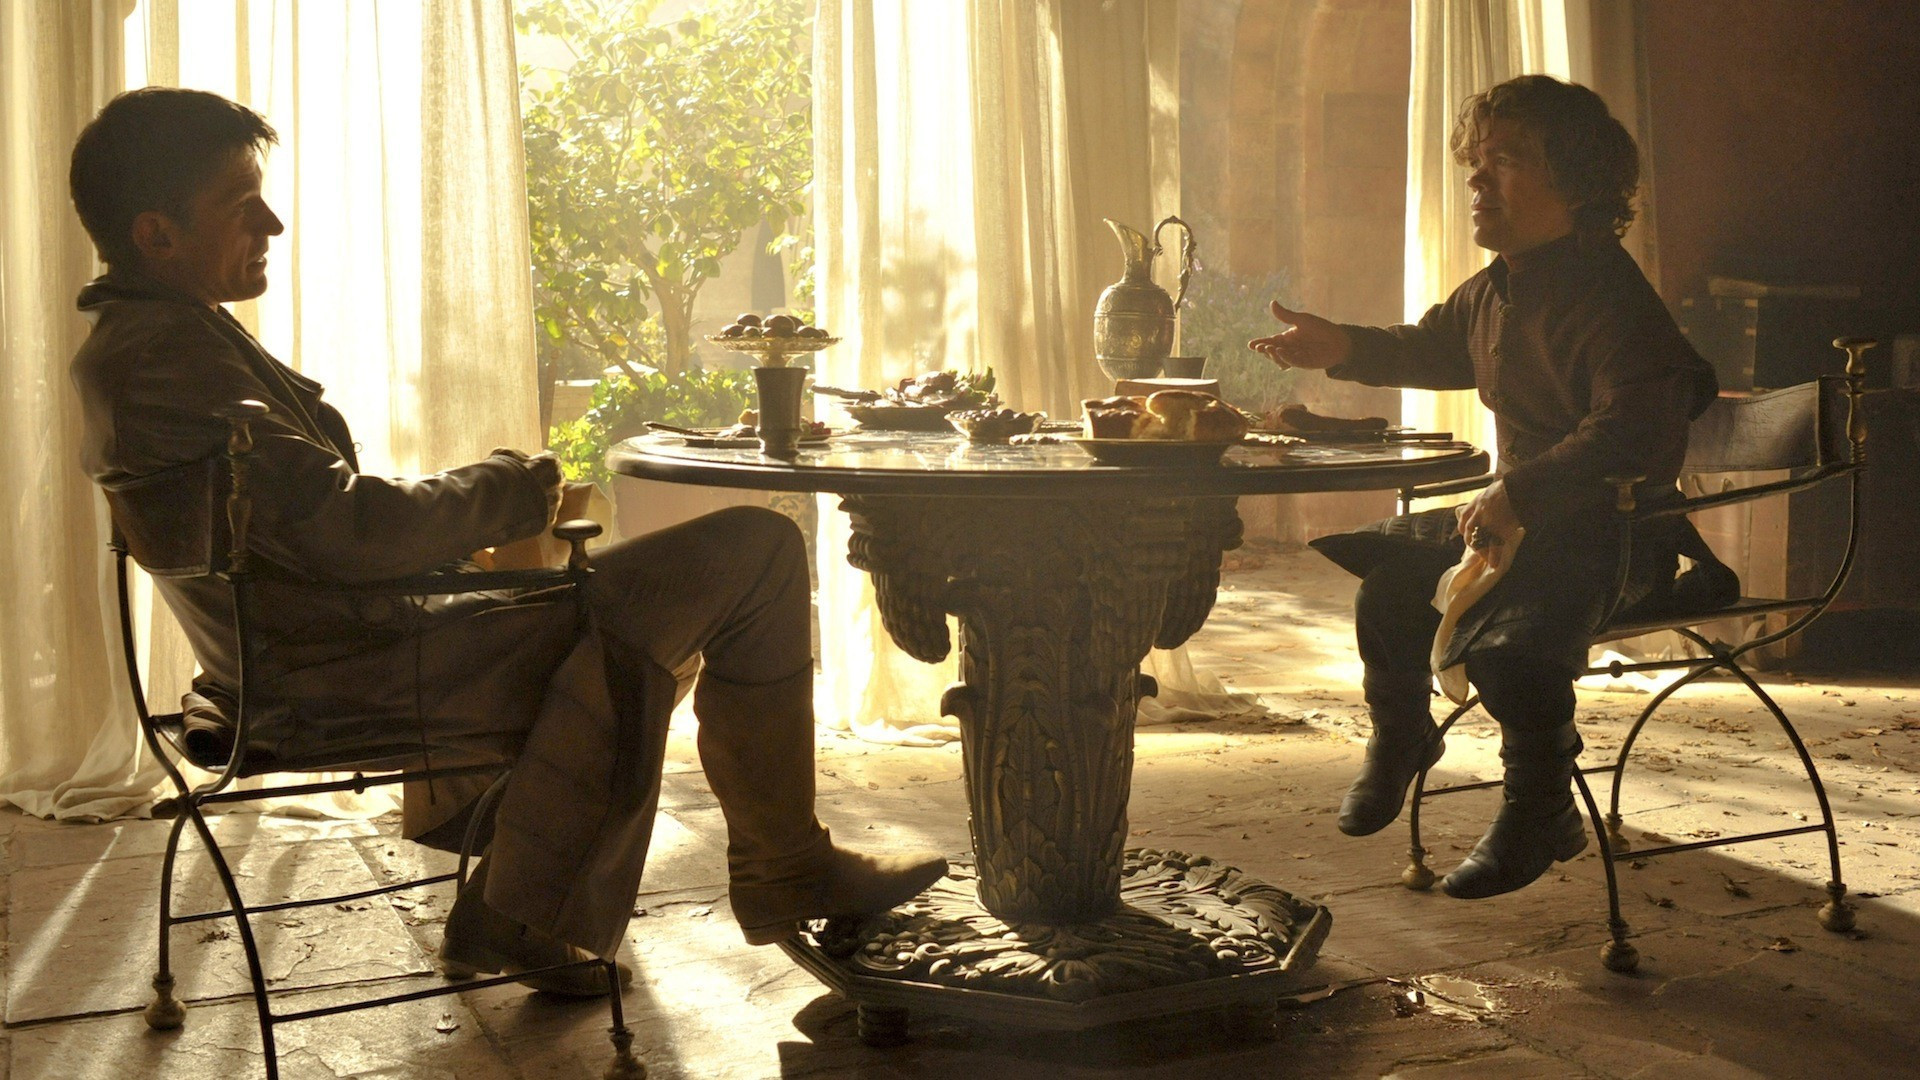 zap-game-of-thrones-season-4-episode-2-the-lion-and-the-rose-photos-20140328